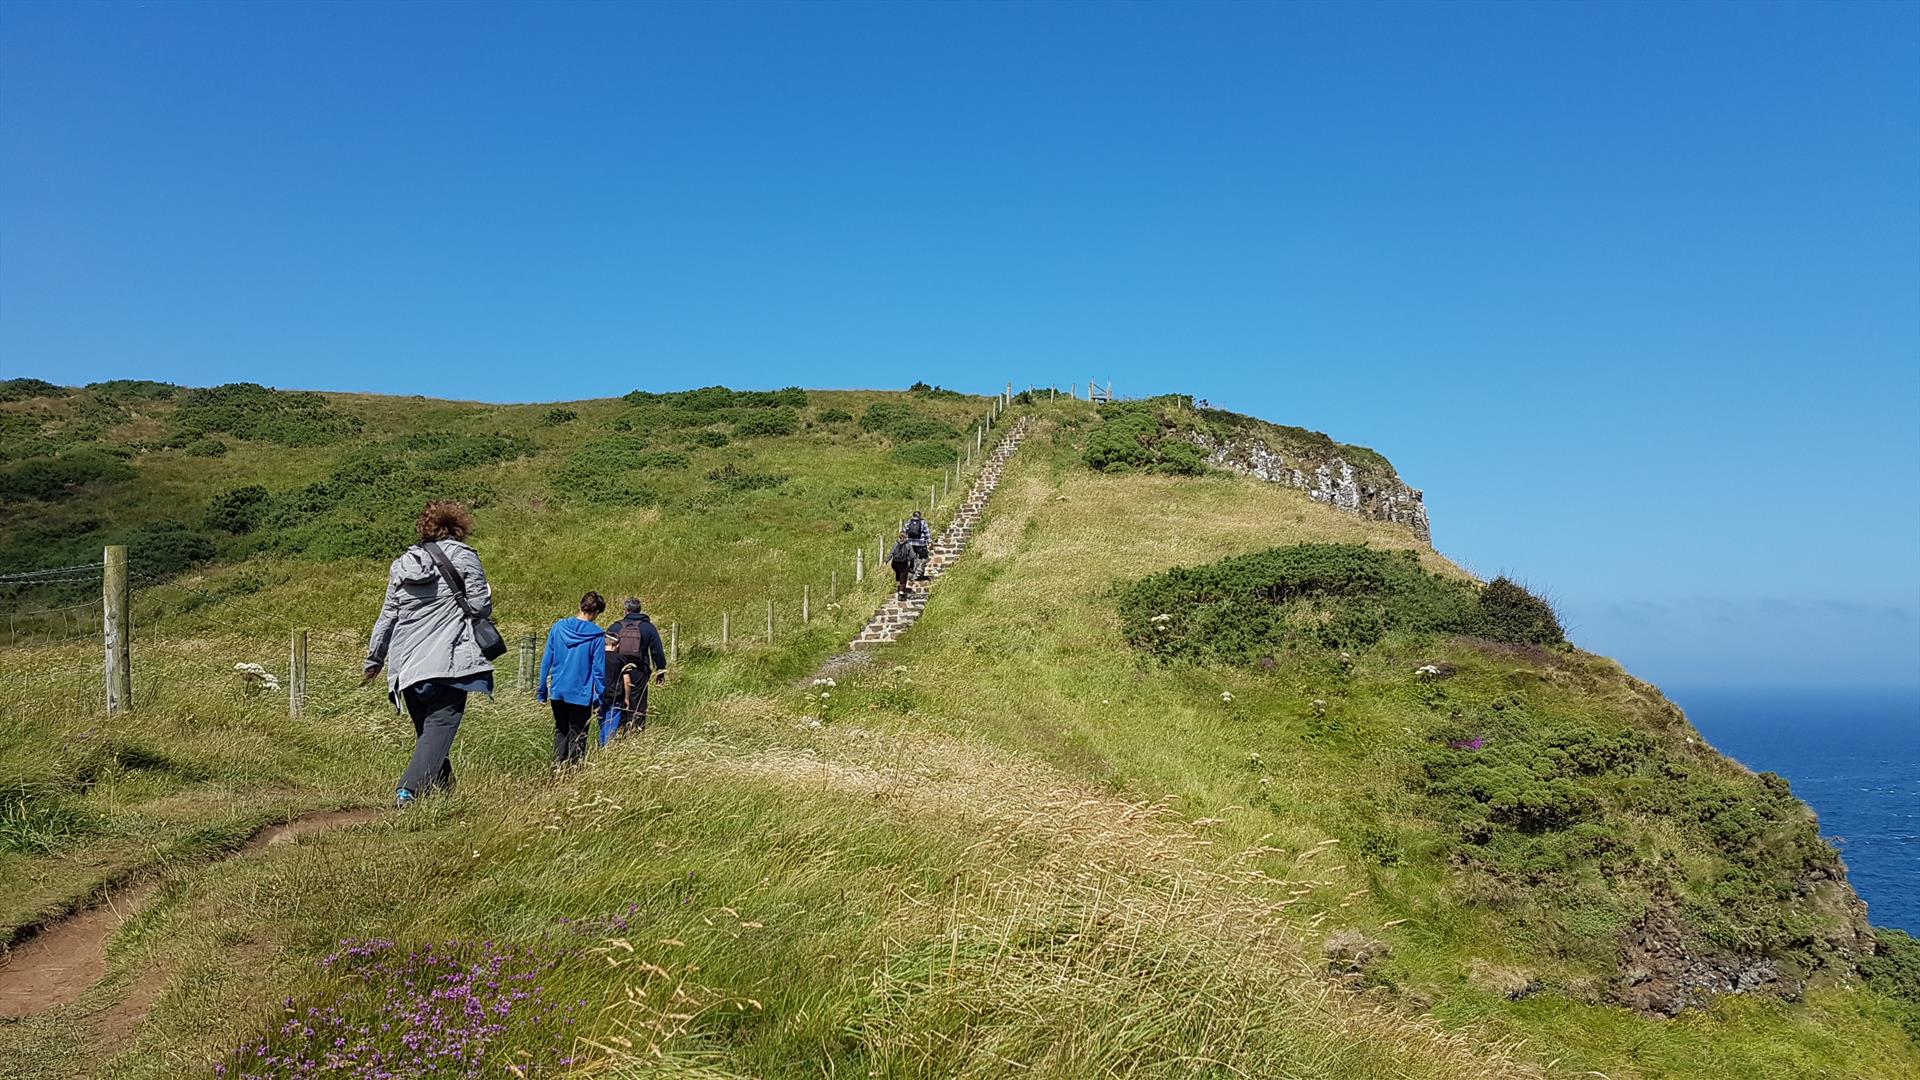 A group of walkers travelling along the coastal path, with green grass, shrubs and the sea visible below in the distance